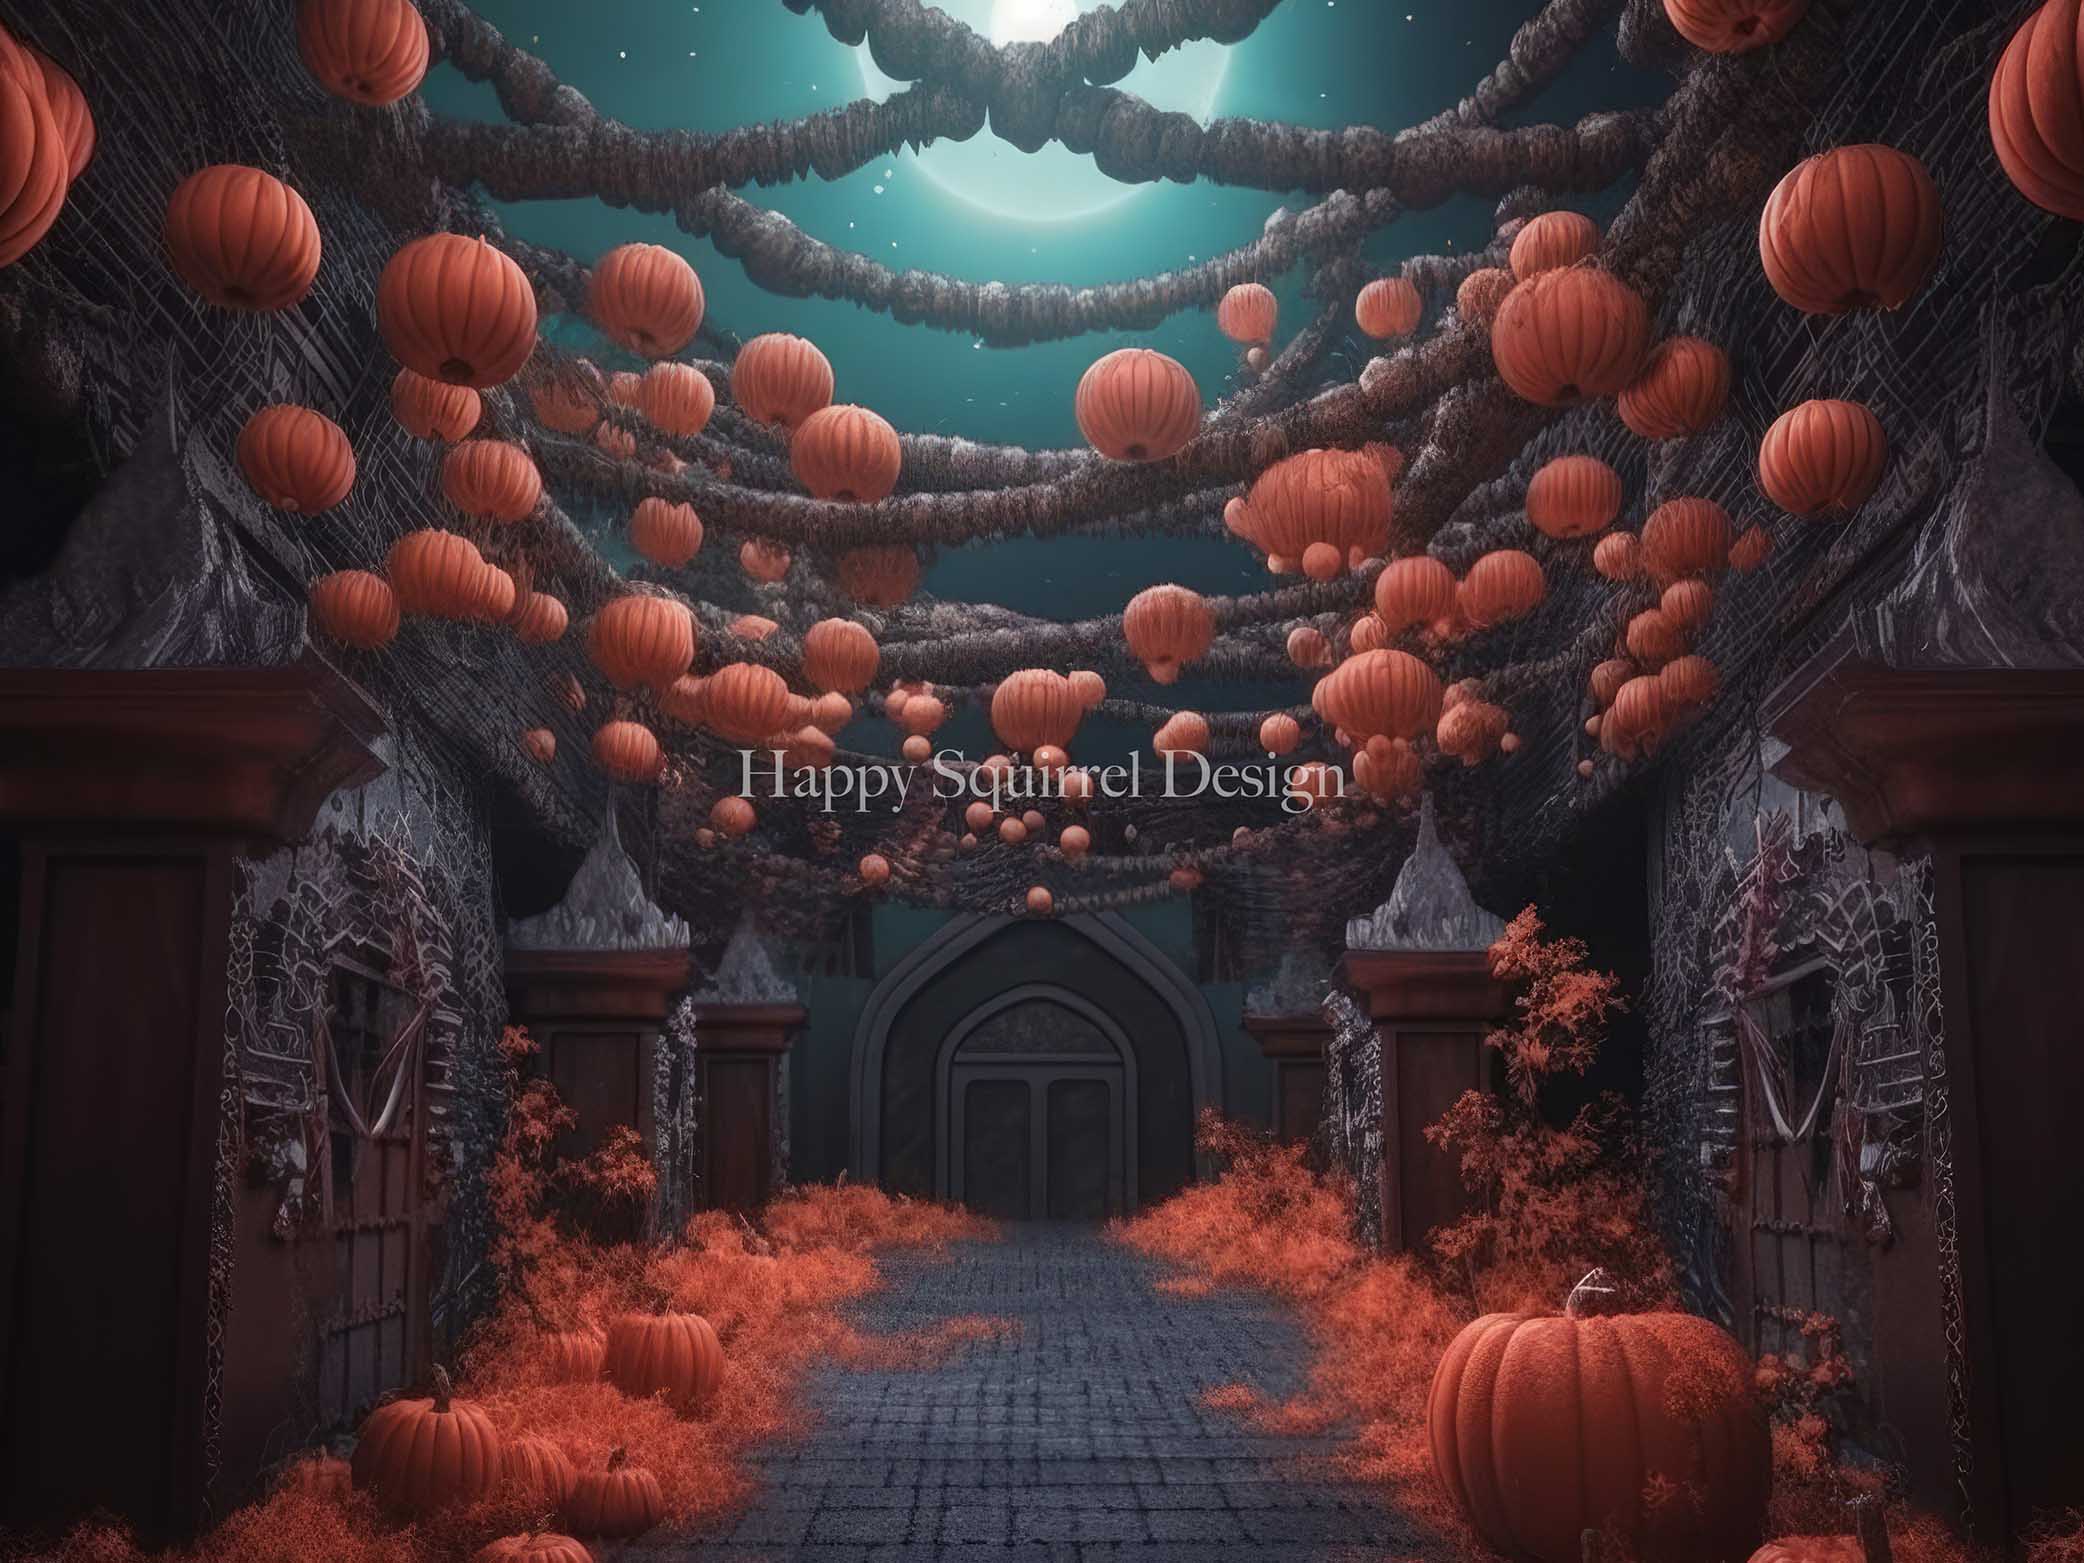 Kate Halloween Streaming Pumpkins Backdrop Designed by Happy Squirrel Design